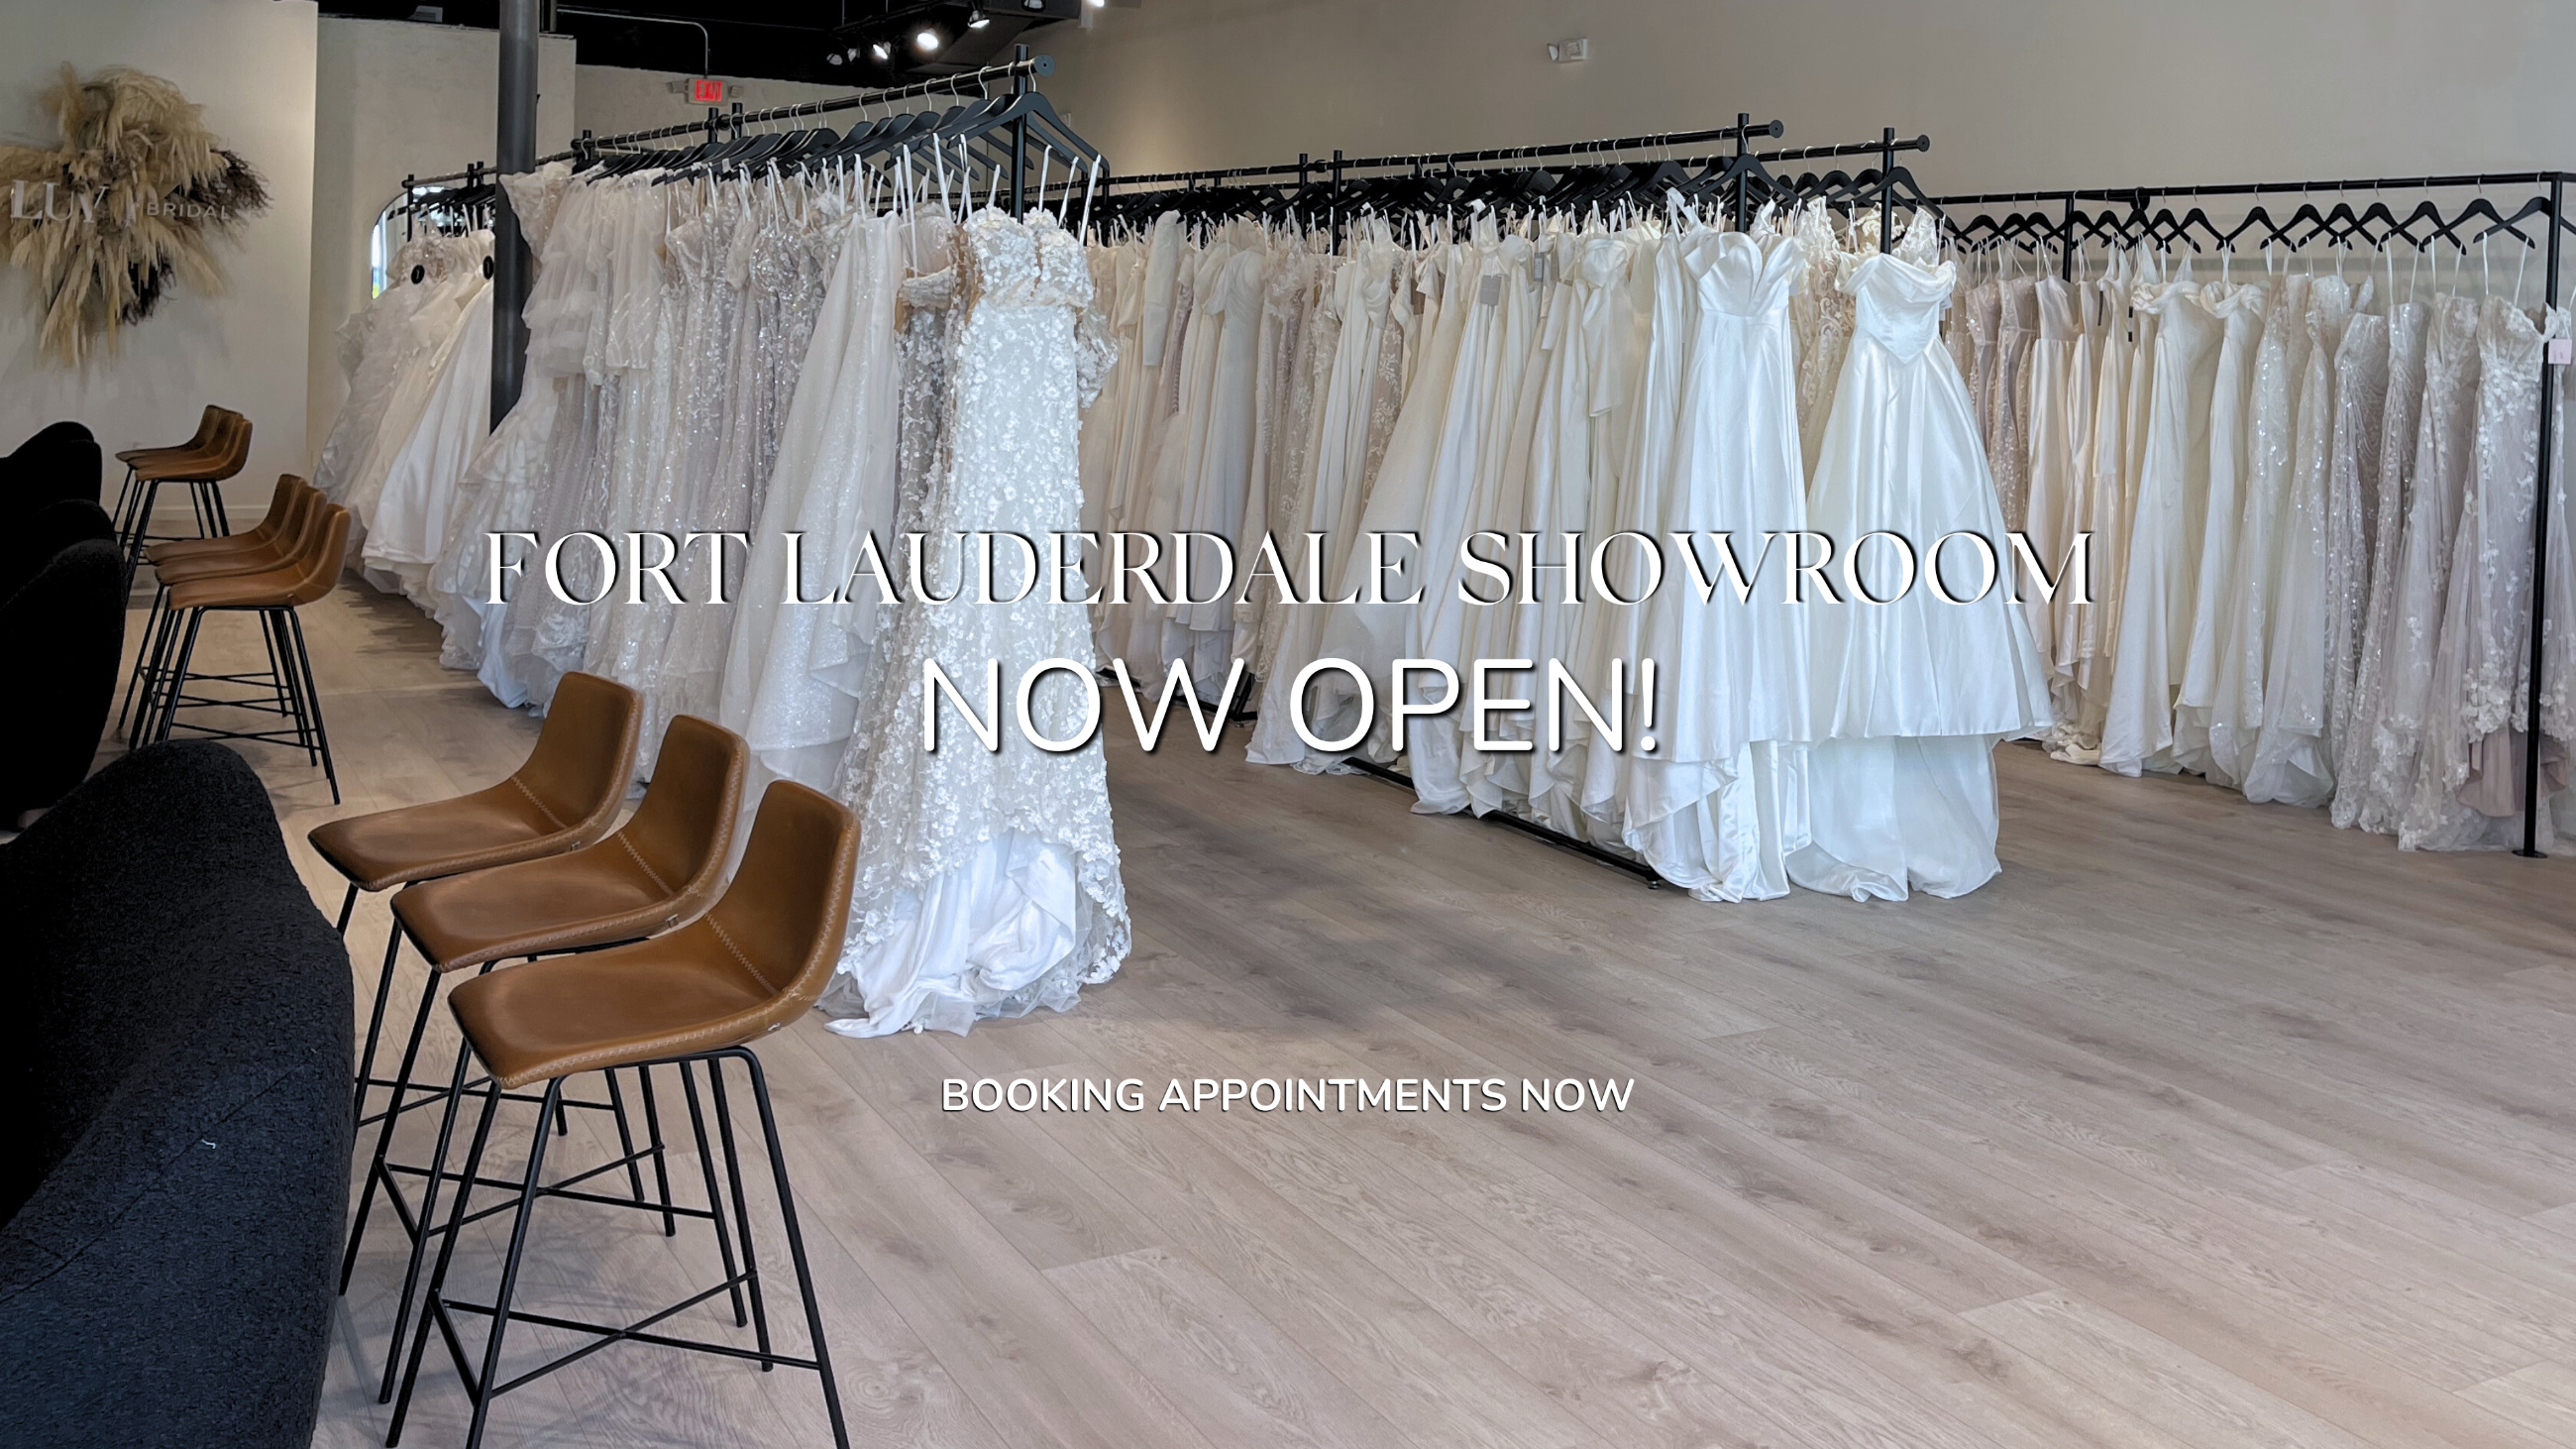 New Luv Bridal Showroom in Fort Laudedale Florida open now!